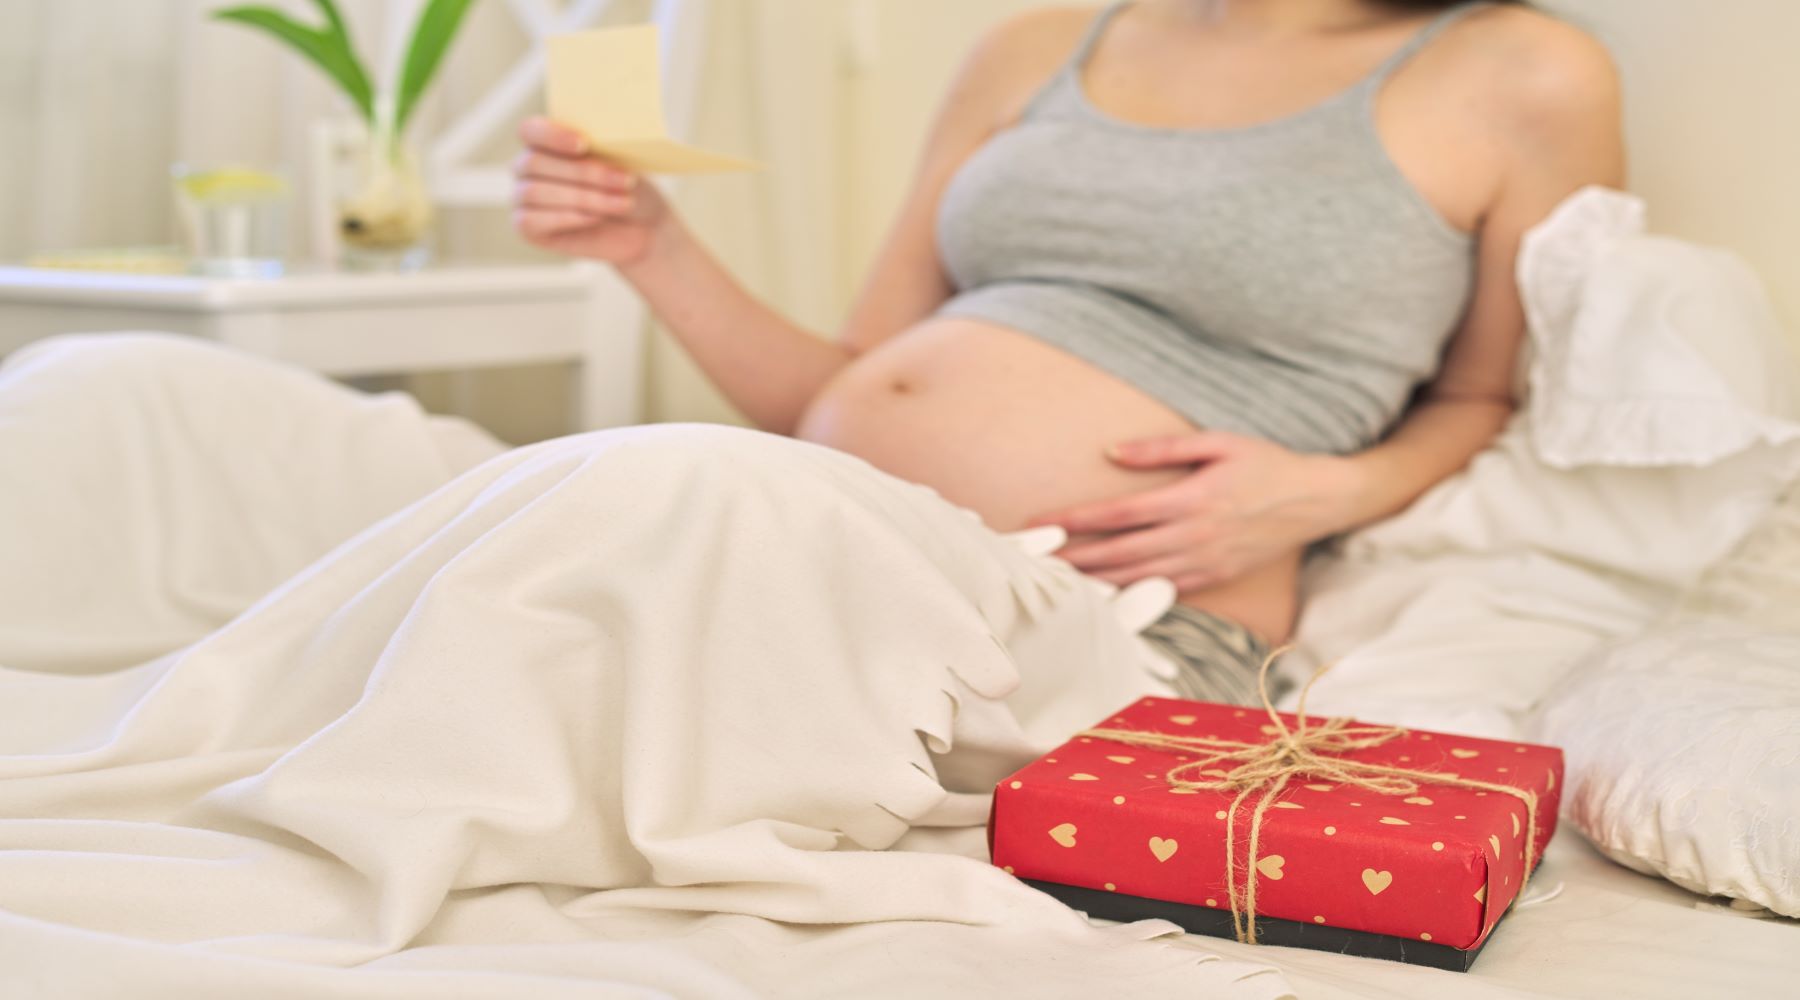 10 Great Gift Ideas For Pregnant Women - Sleepybelly